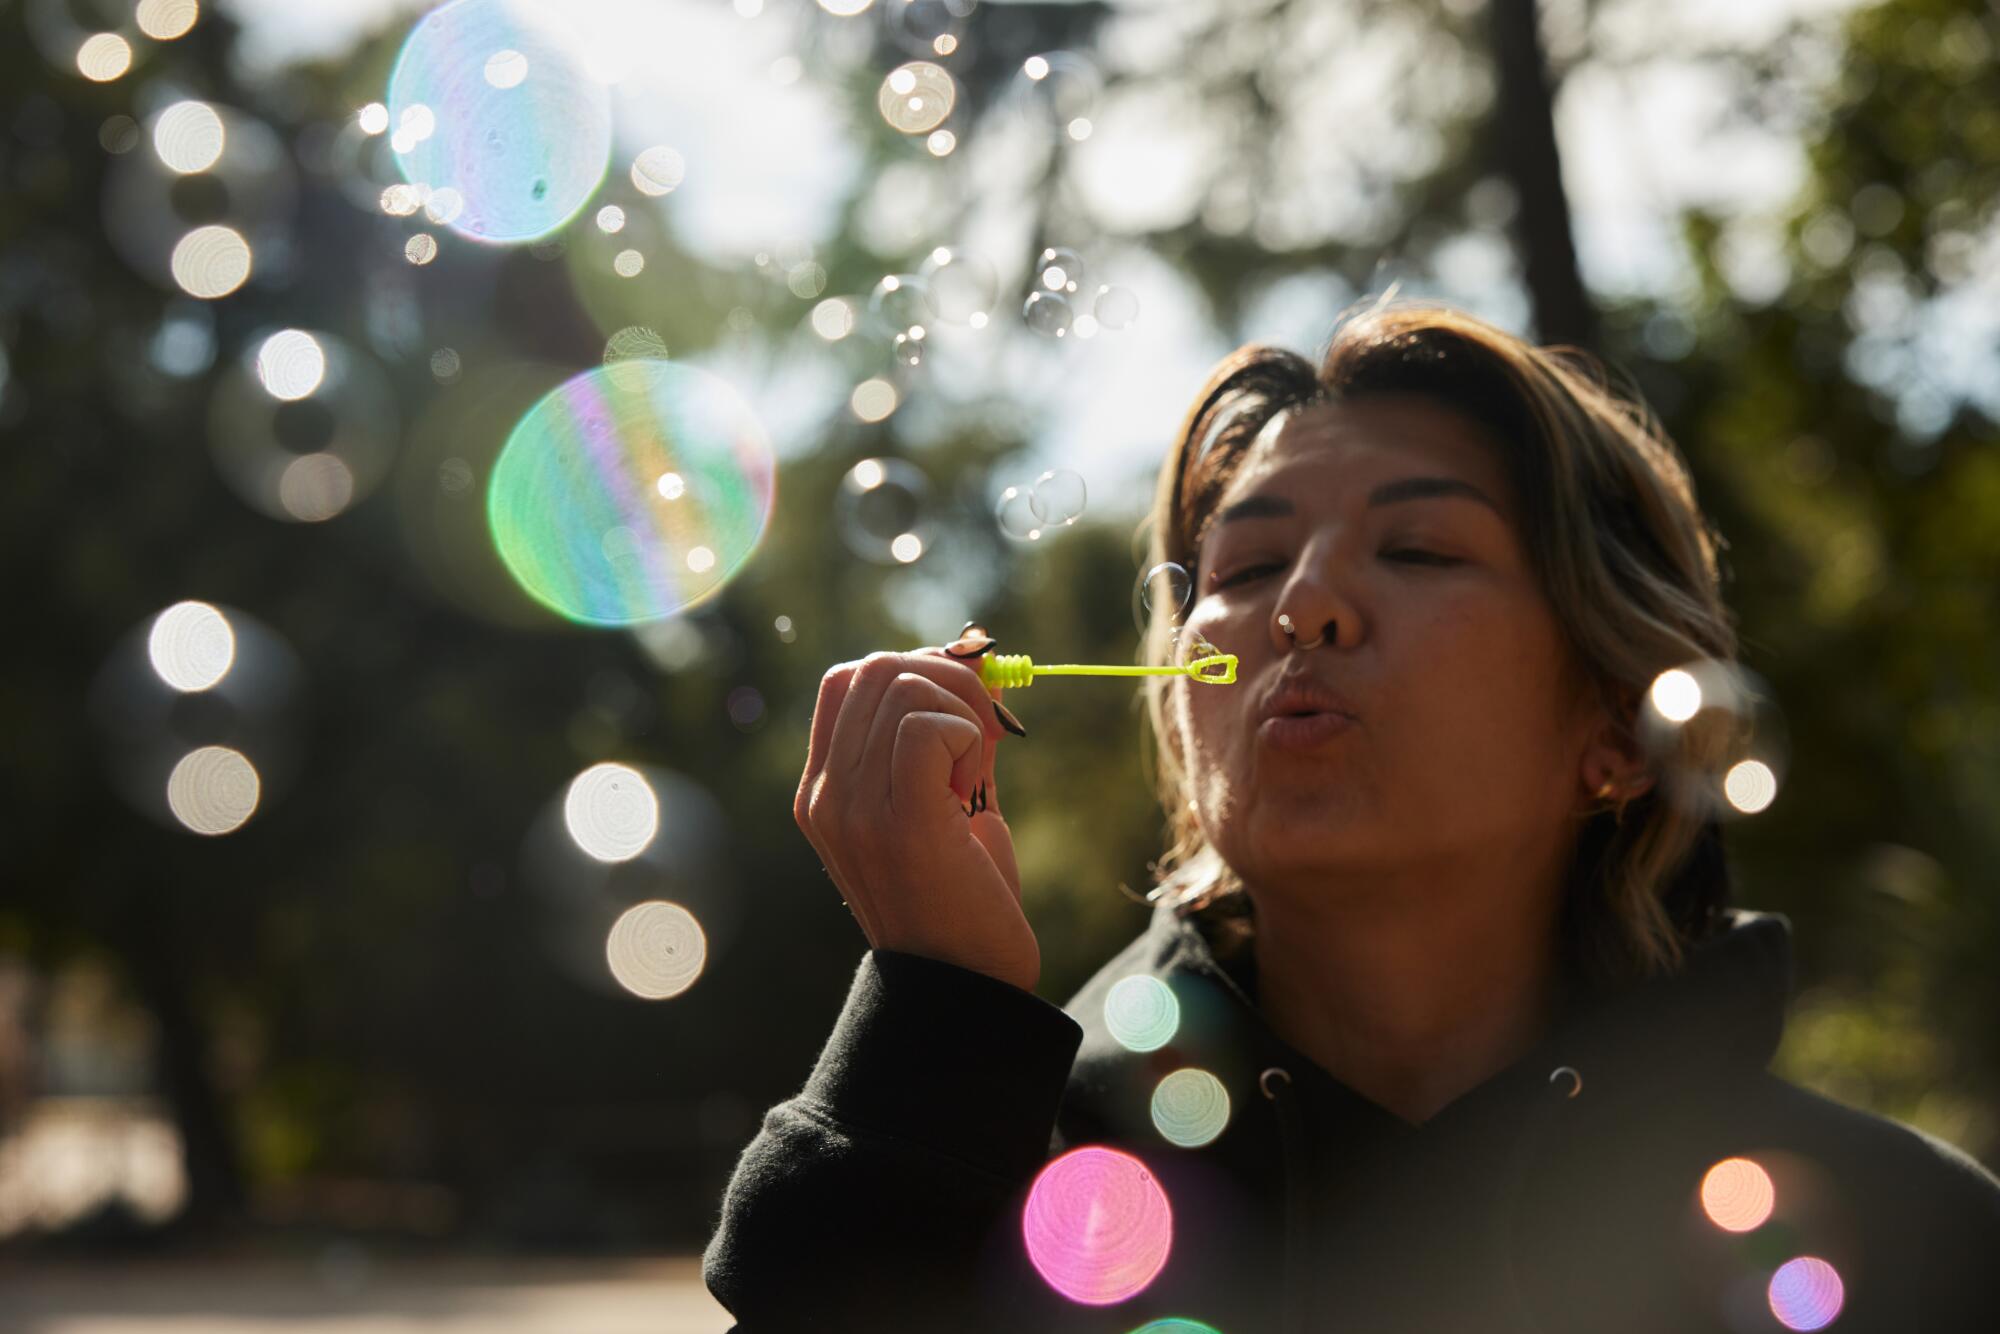 A woman blows bubbles through a bubble wand at the Huntington.